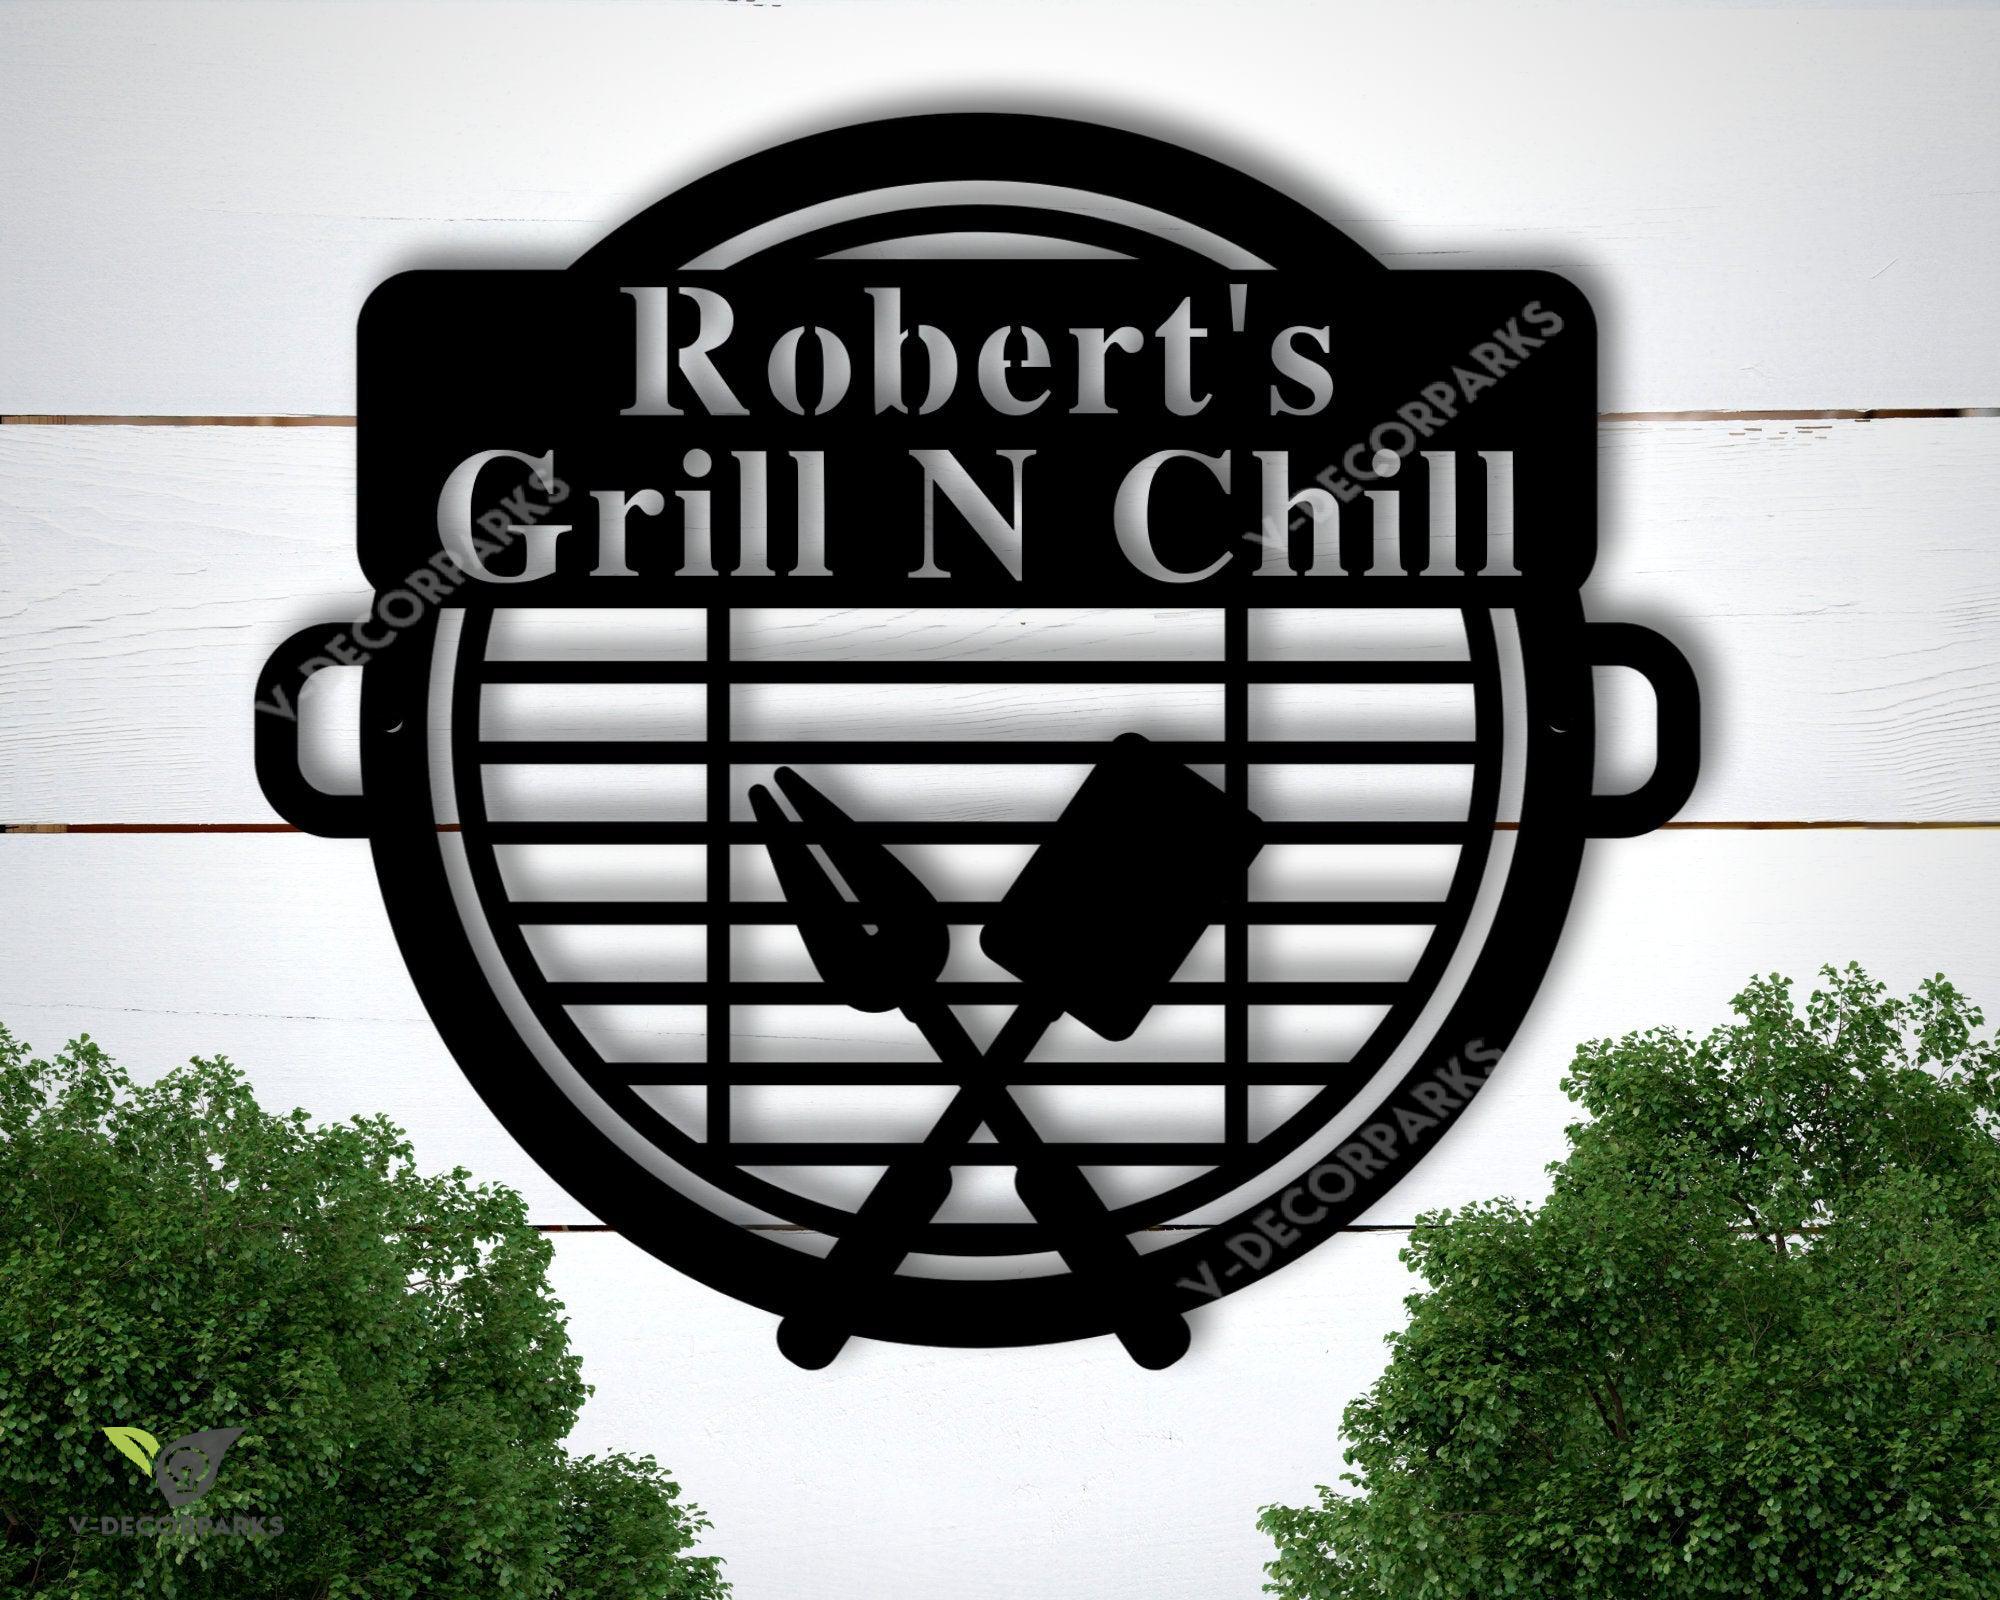 Personalized Metal Bbq Sign, Personalized Grill Sign, Personalized Bbq Sign, Bbq Grill Sign, Bbq Party Decor, Out Door Kitchen Metal Signs